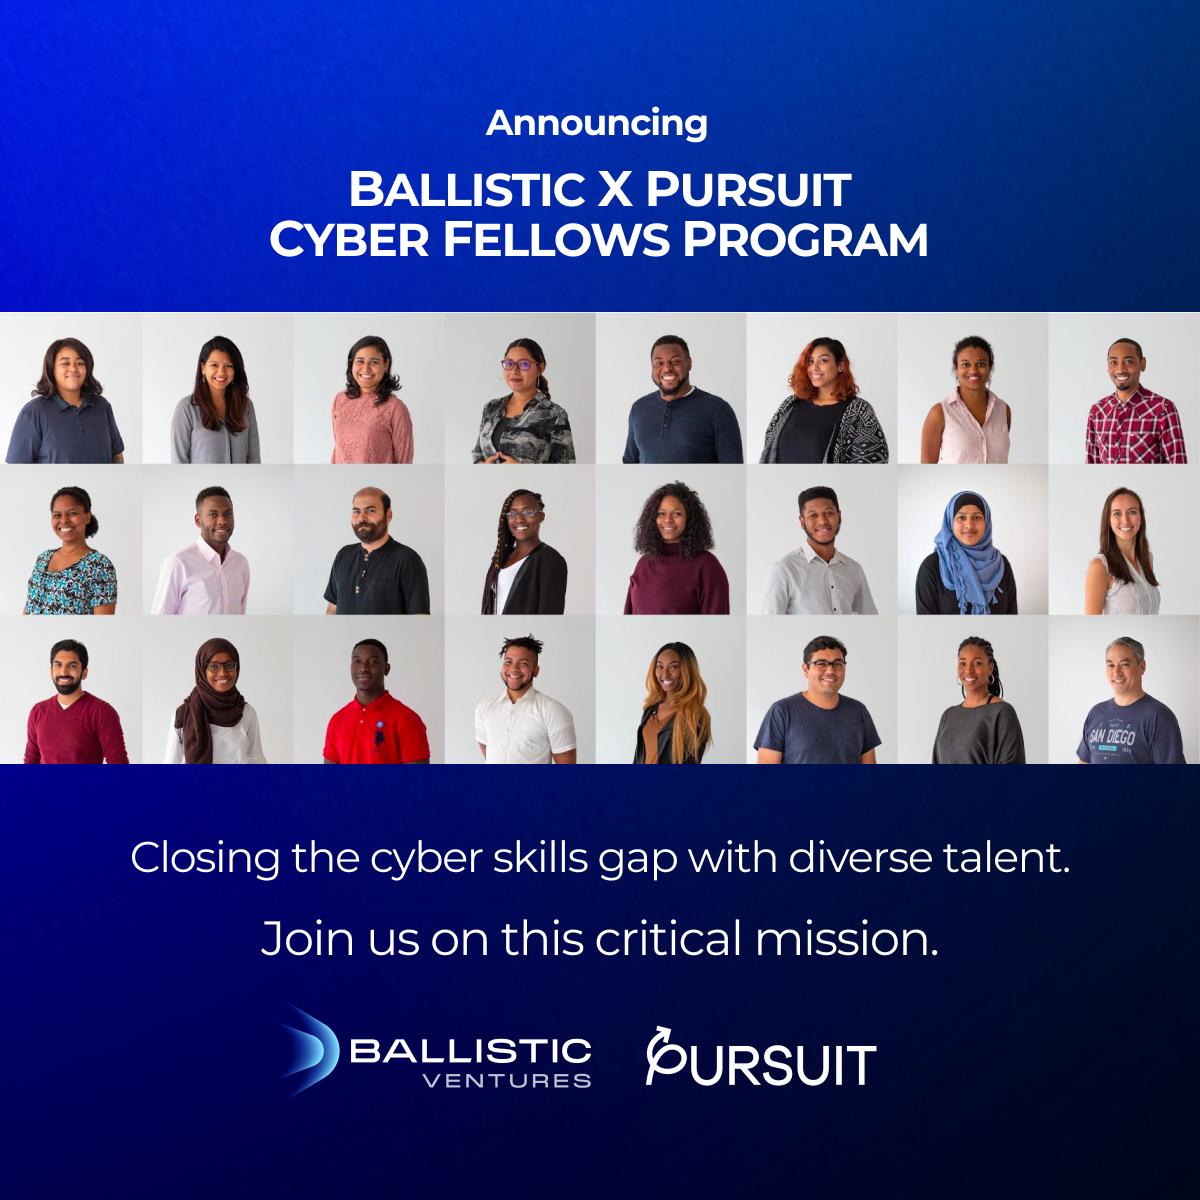 Ballistic Ventures and Pursuit launch program to address the cyber skills gap with diverse talent